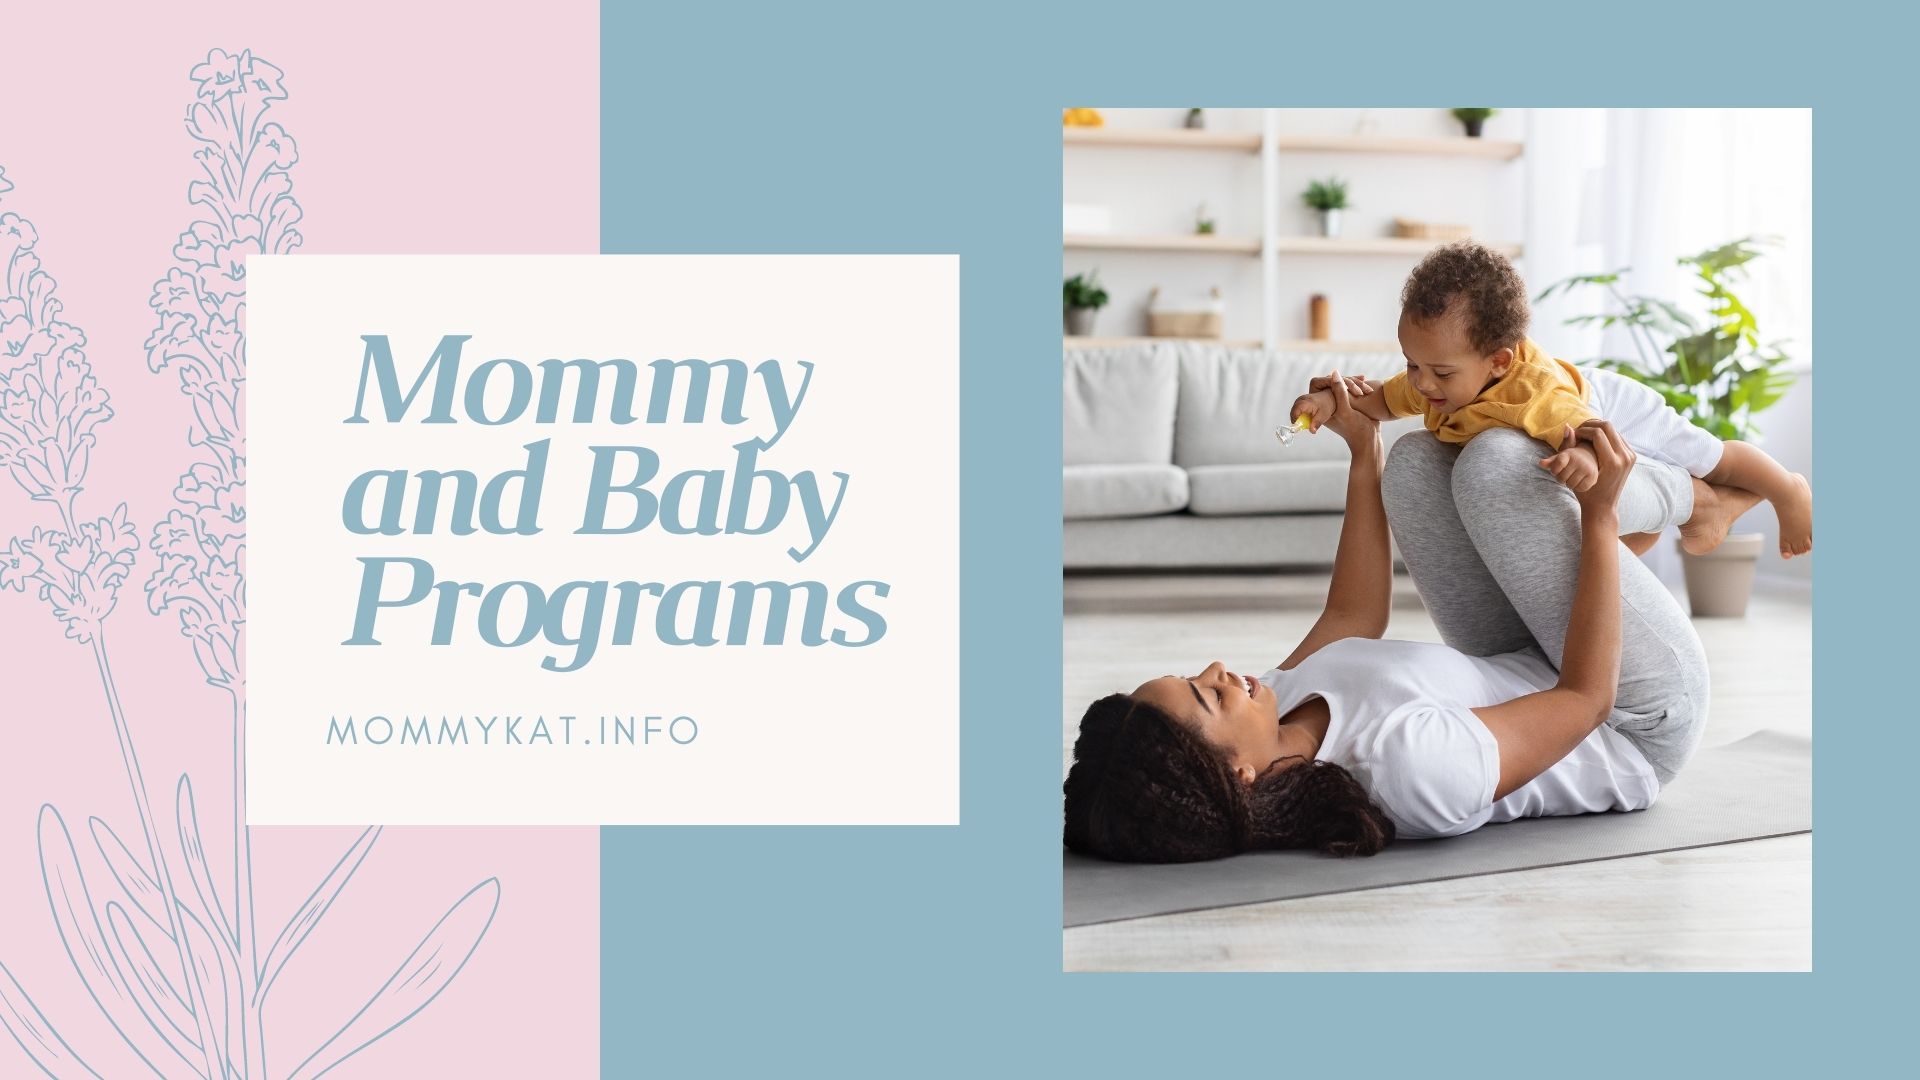 Mom-and-baby-classes-come-with-plenty-of-benefits.-Find-out-why-you-should-sign-up-for-them-here